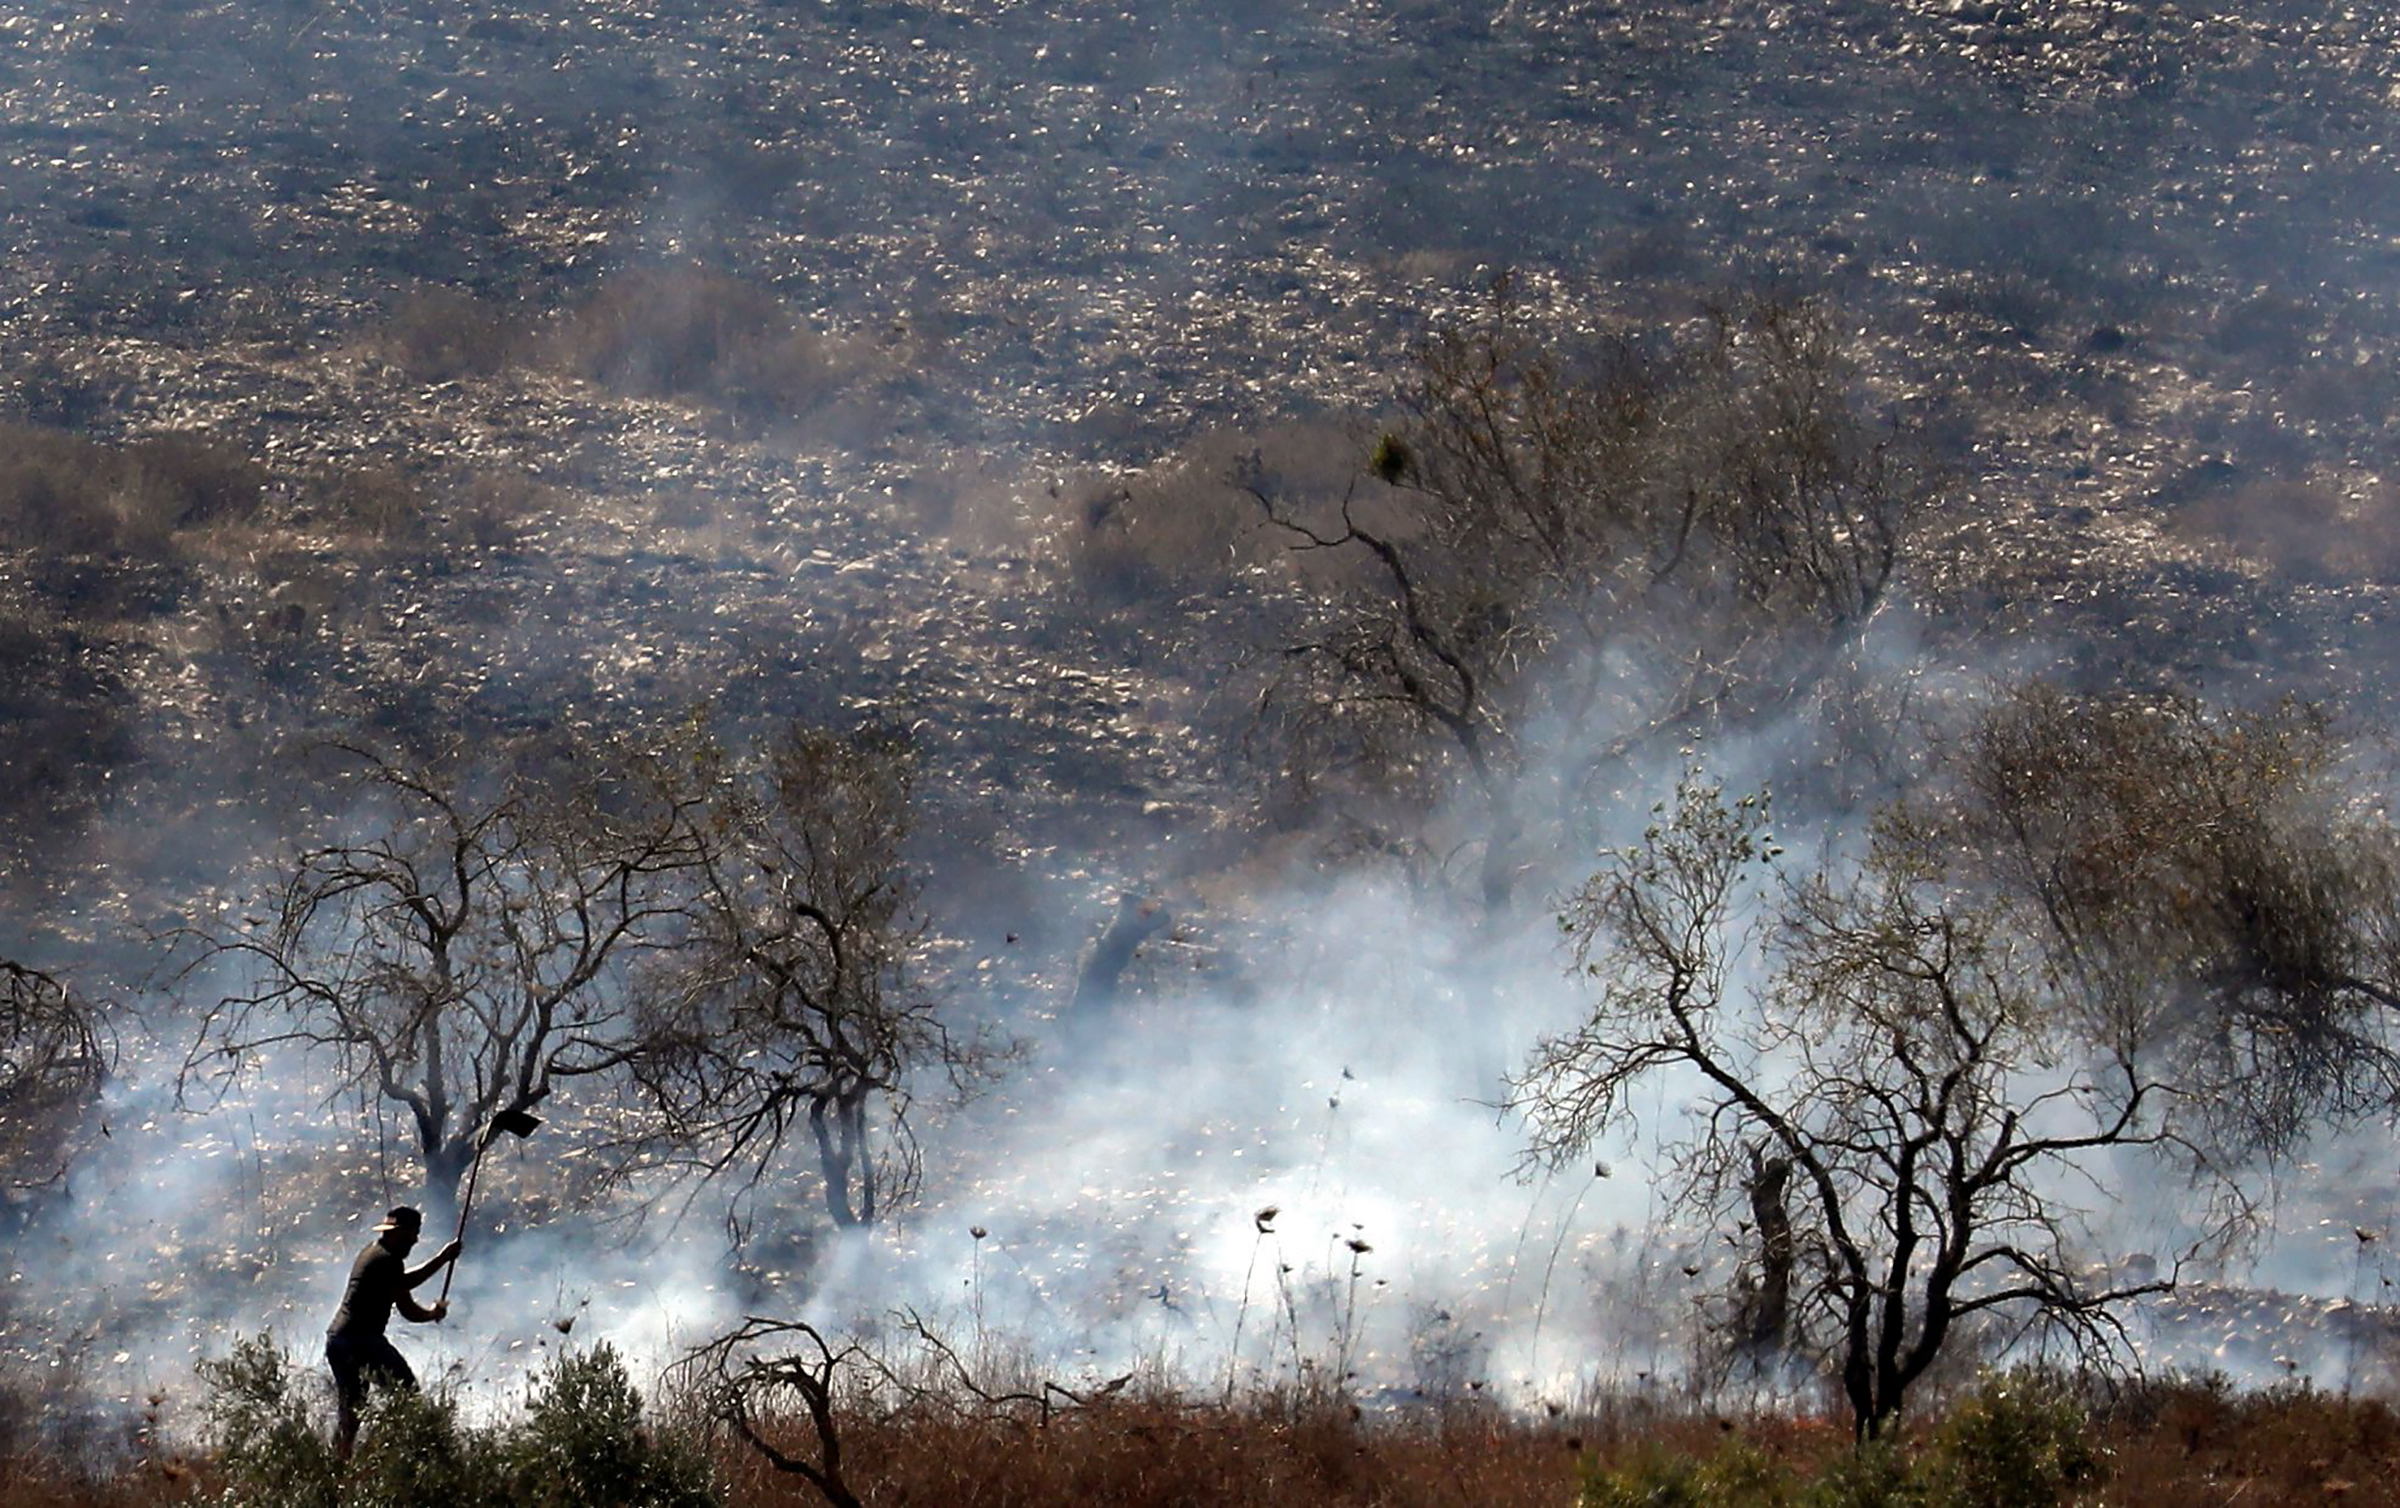 A Palestinian tries to extinguish a fire in an olive grove near the Palestinian village of Burin in the northern West Bank by the Israeli settlement of Yitzhar, on Oct. 16, 2019. (Jaafar Ashtiyeh—AFP via Getty Images)